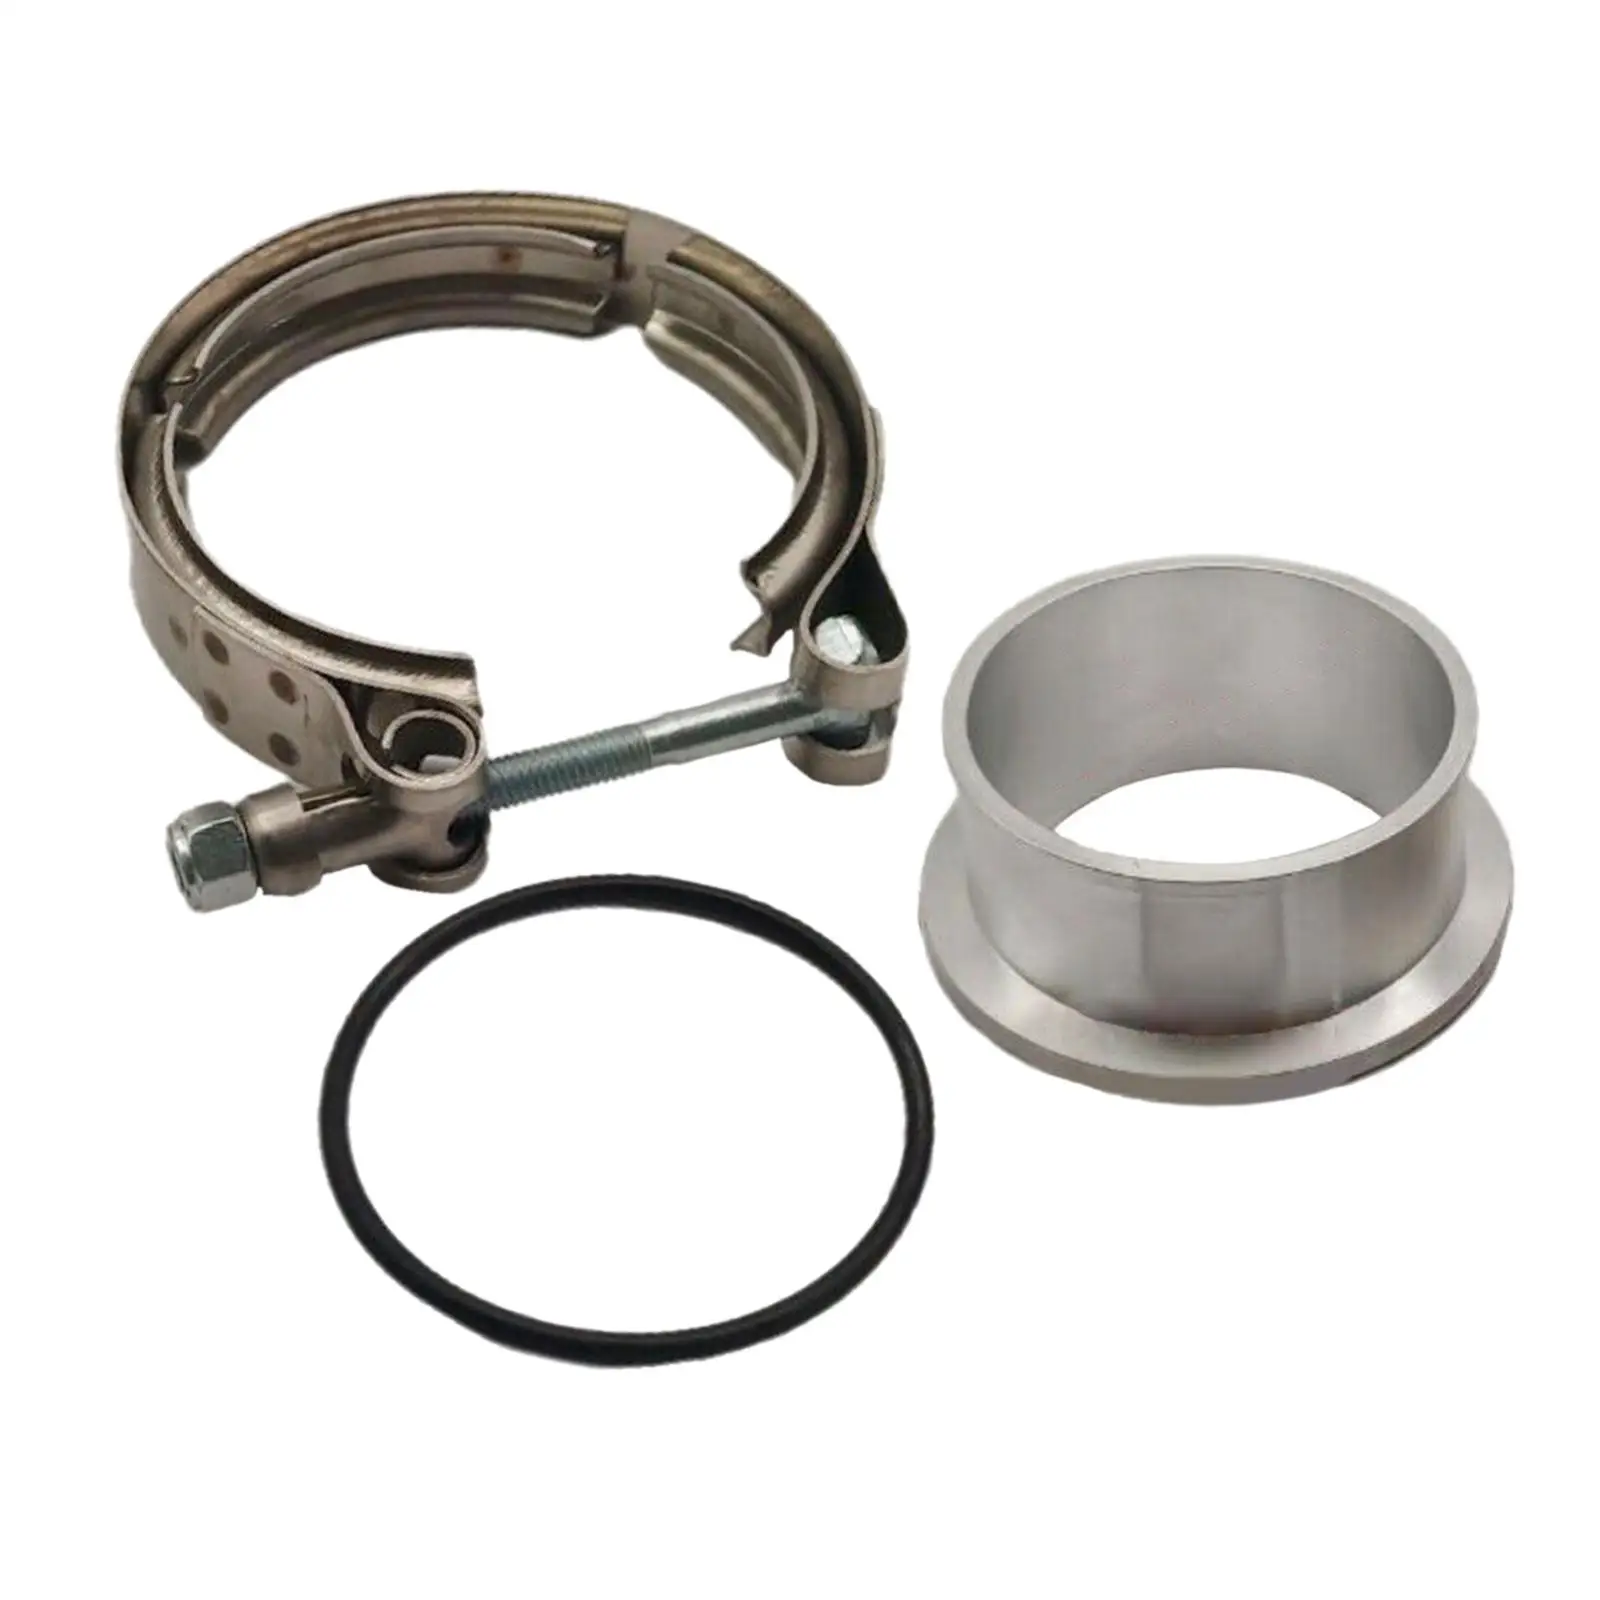 V Band Clamp Portable Sturdy Exhaust Pipe Clamp for Holset Cummins 5.9L